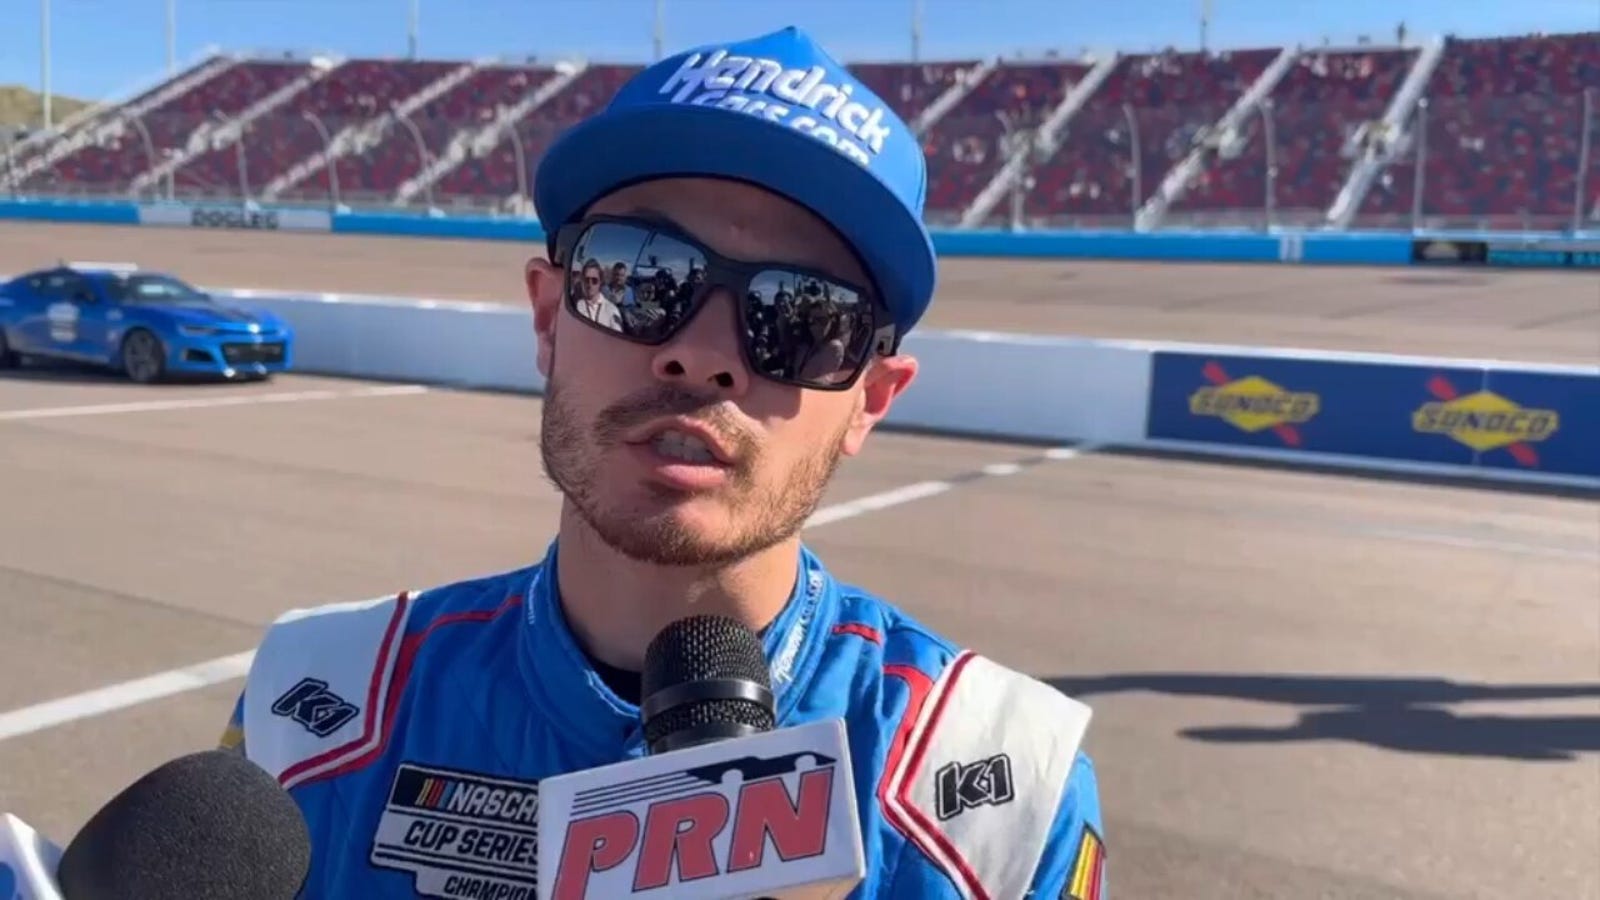 Kyle Larson speaks about William Byron's win and the move that led to Kevin Harvick passing him in the United Rentals Work United 500